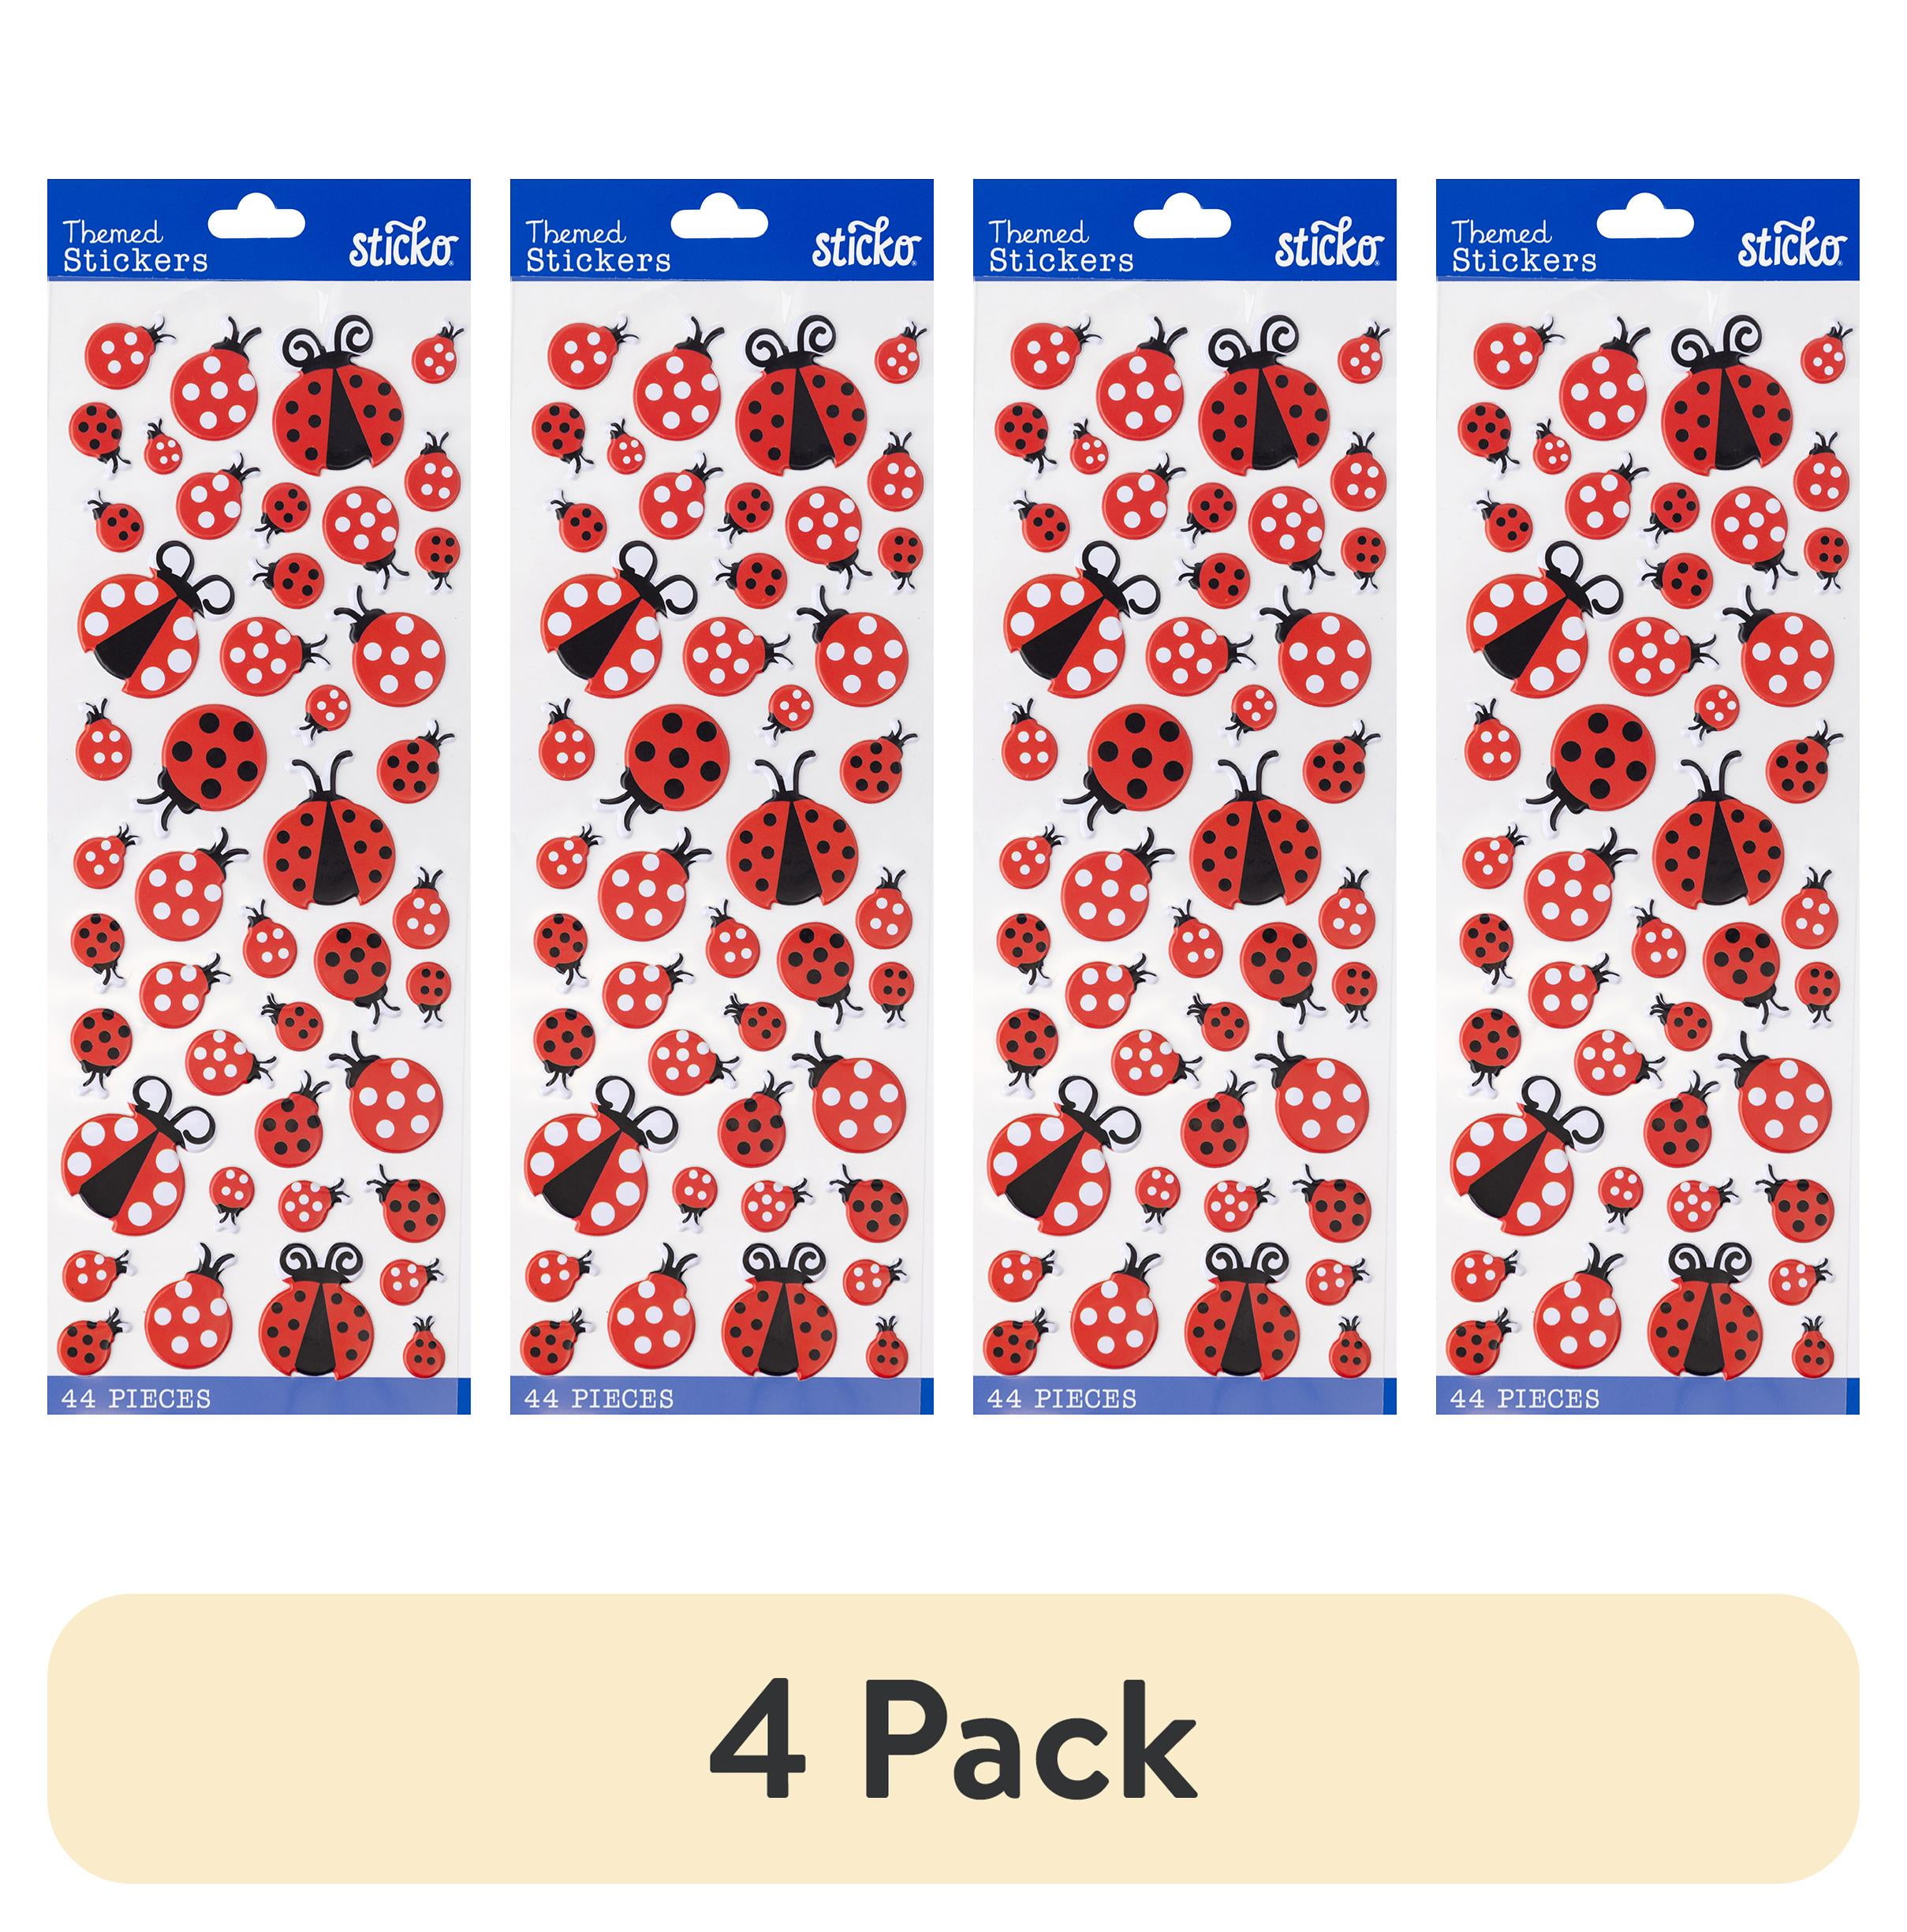 Sticko Classic Solid Multicolor Puffy Themed Ladybugs Plastic